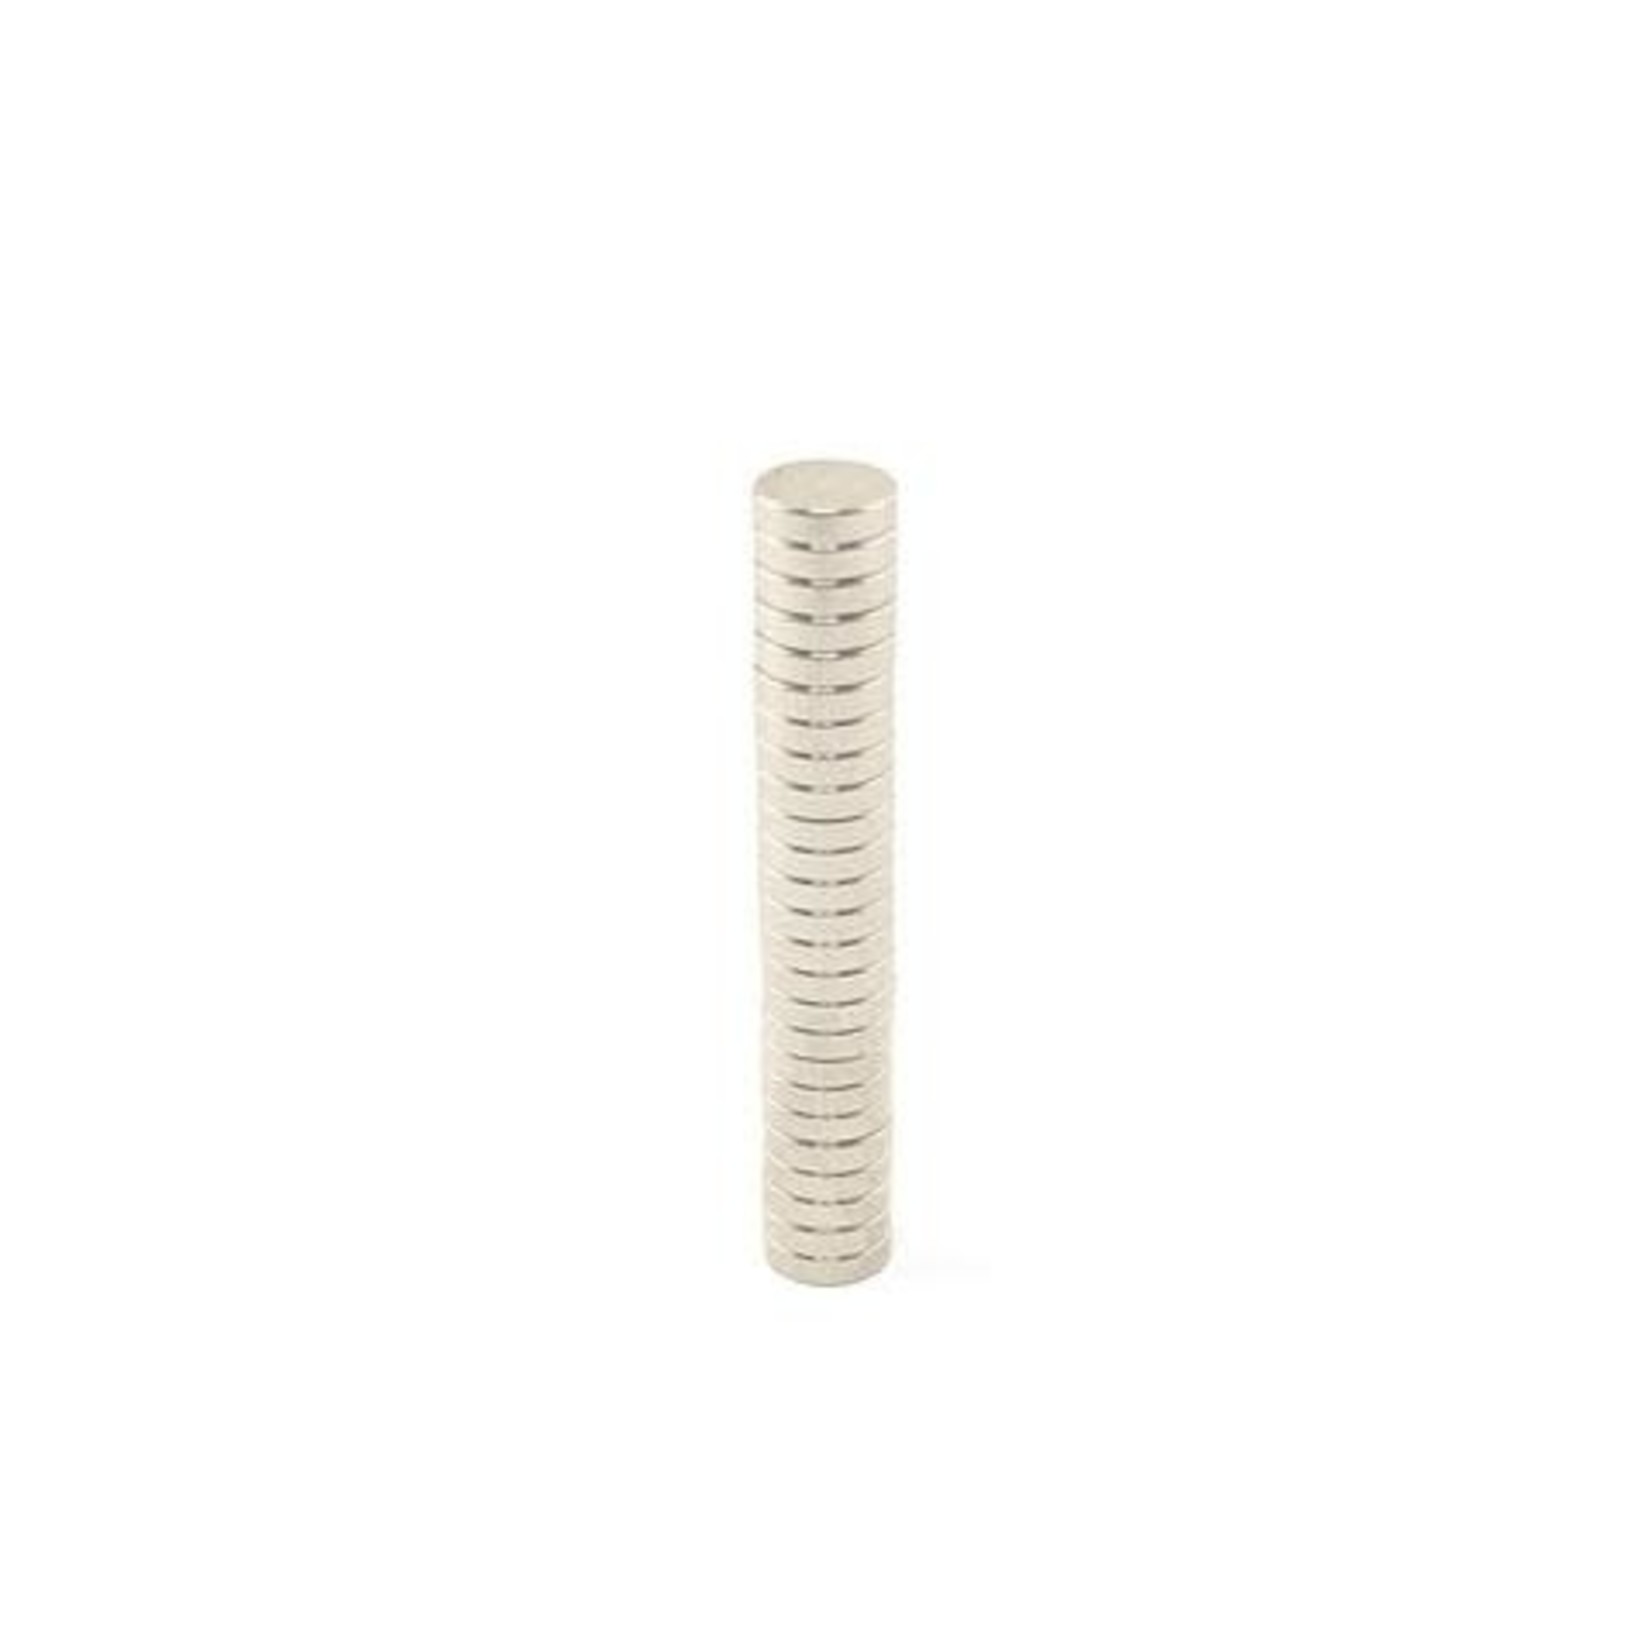 PH10004 3/16 x 1/16 Magnets (25 pack)